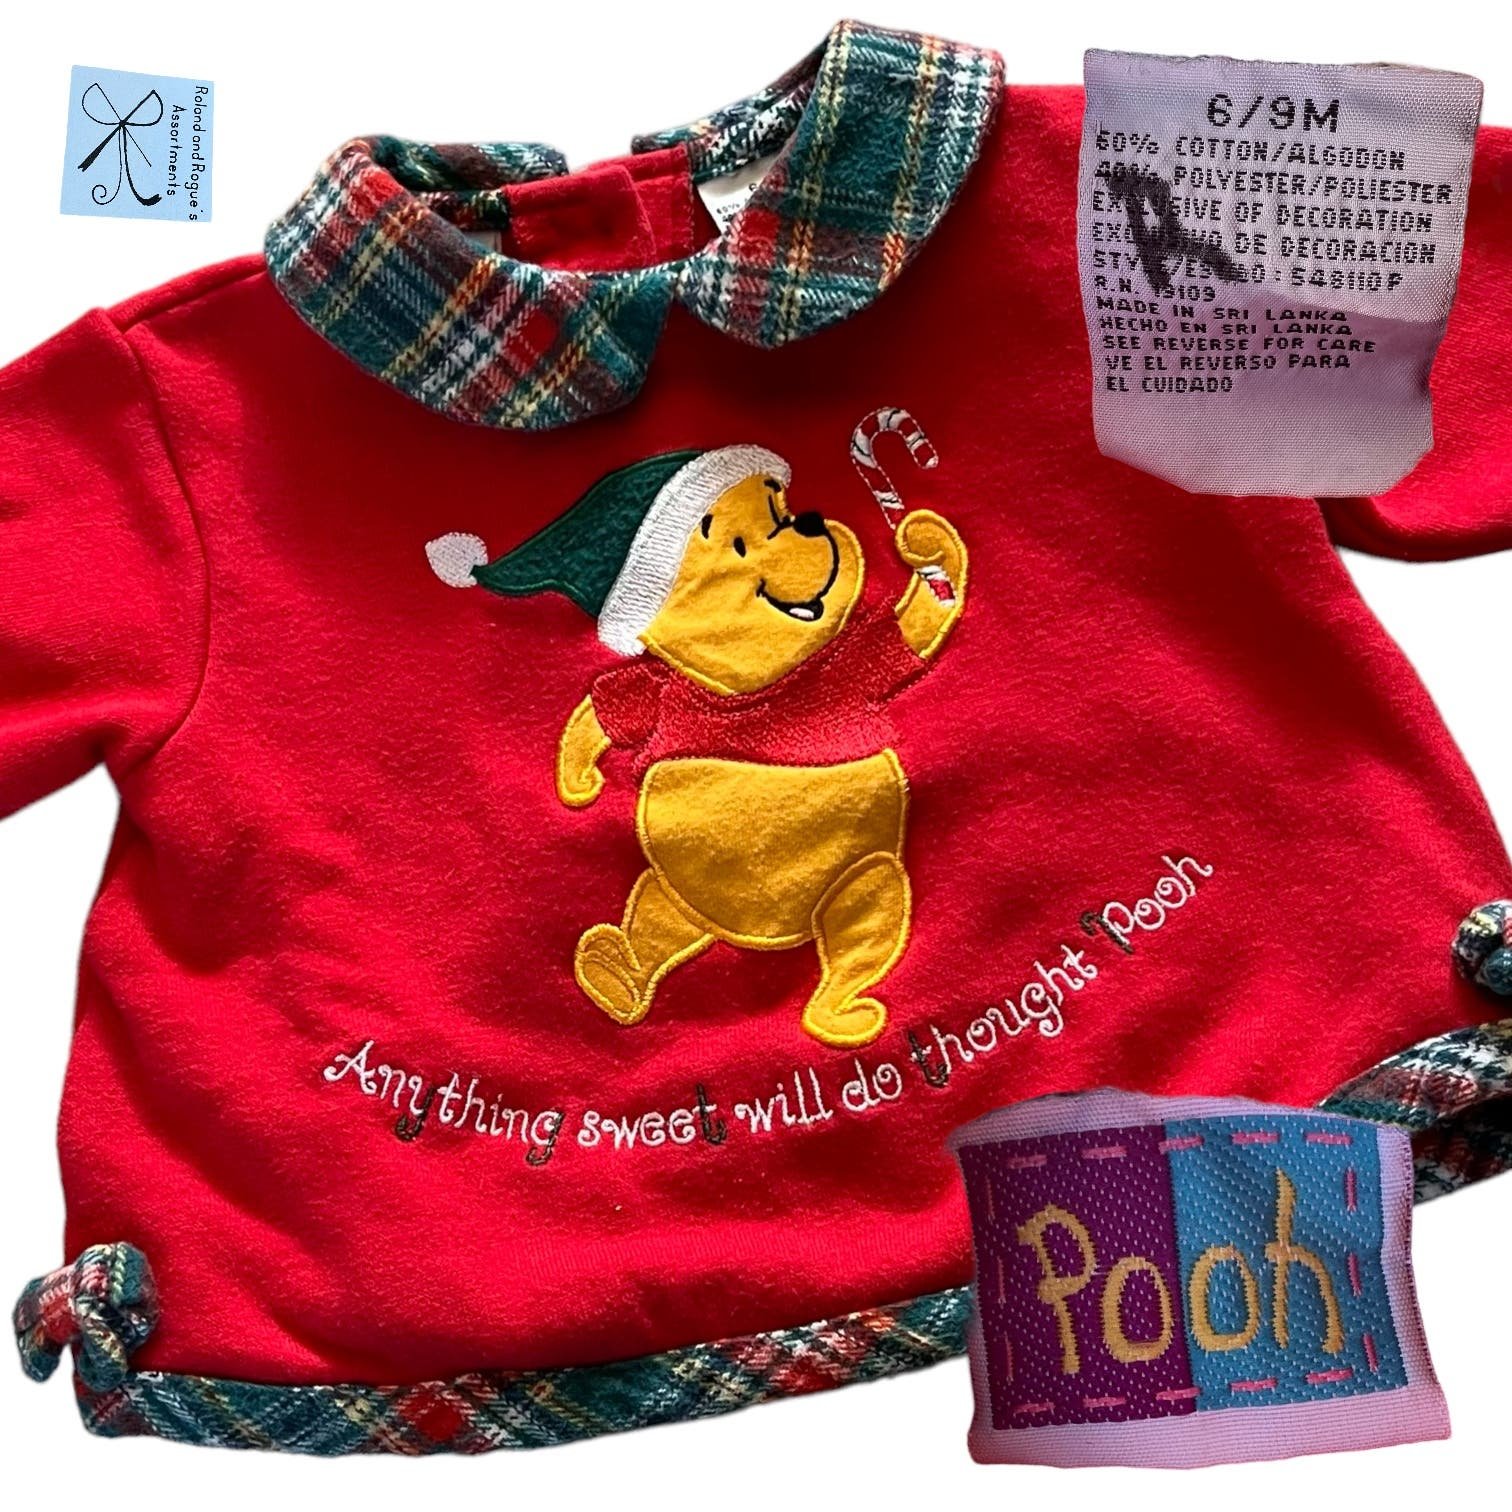 Pooh Disney Winnie the Pooh Anything Sweet will do Pooh Top Baby Sz 6/9 Months B2THI731A